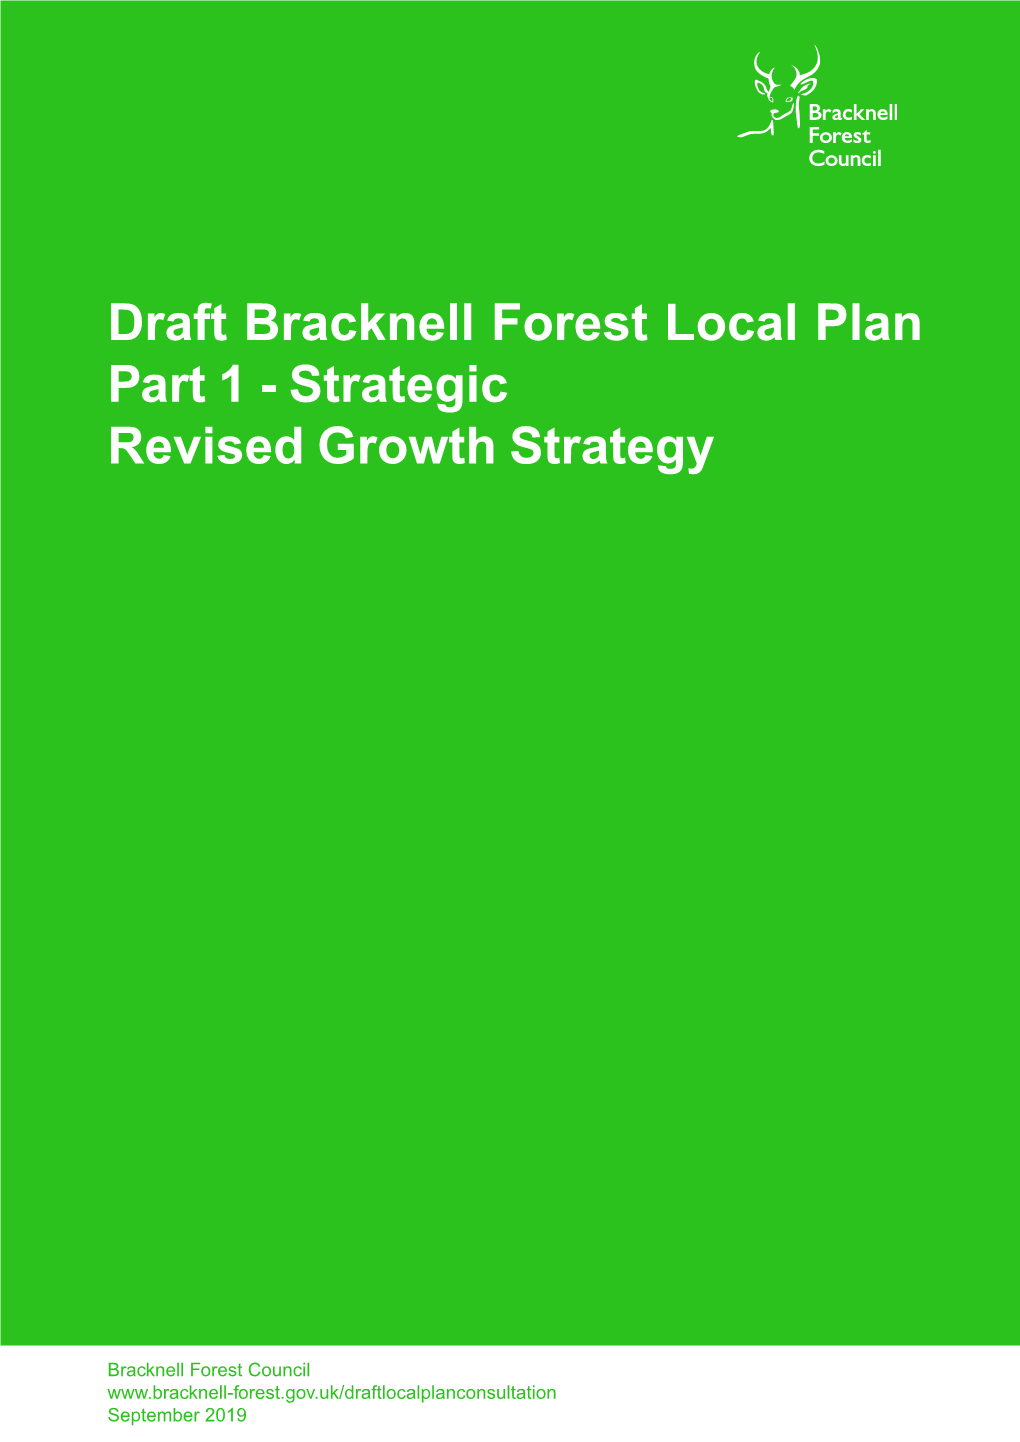 Draft Bracknell Forest Local Plan Part 1 - Strategic Revised Growth Strategy